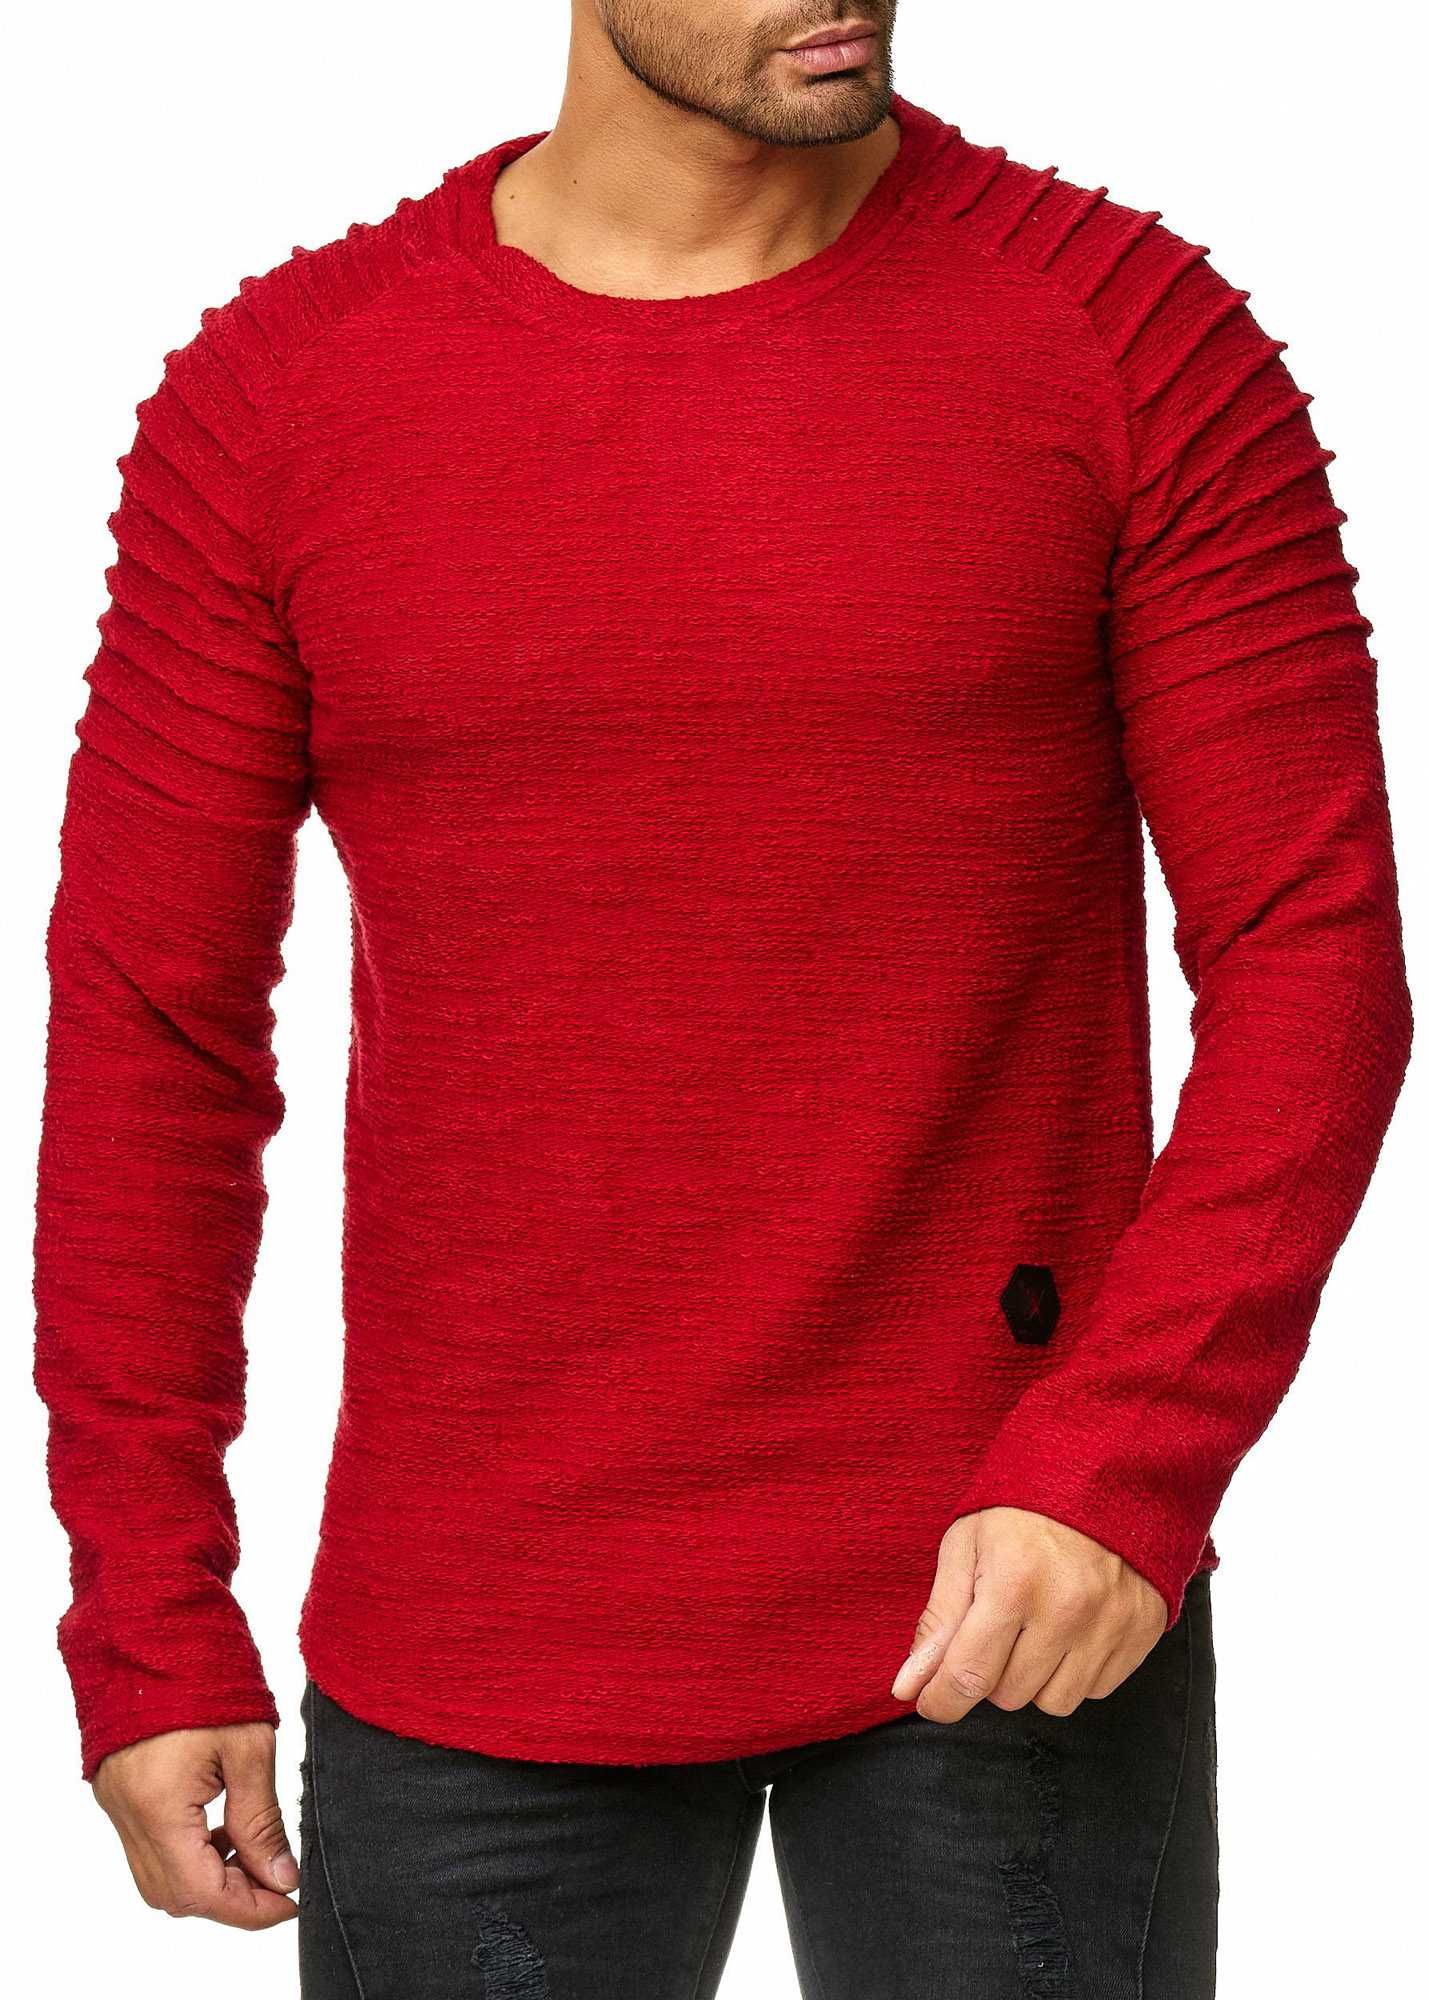 Limitless Red Structure Jerone - 1261 - Long Sleeves - Jerone.com